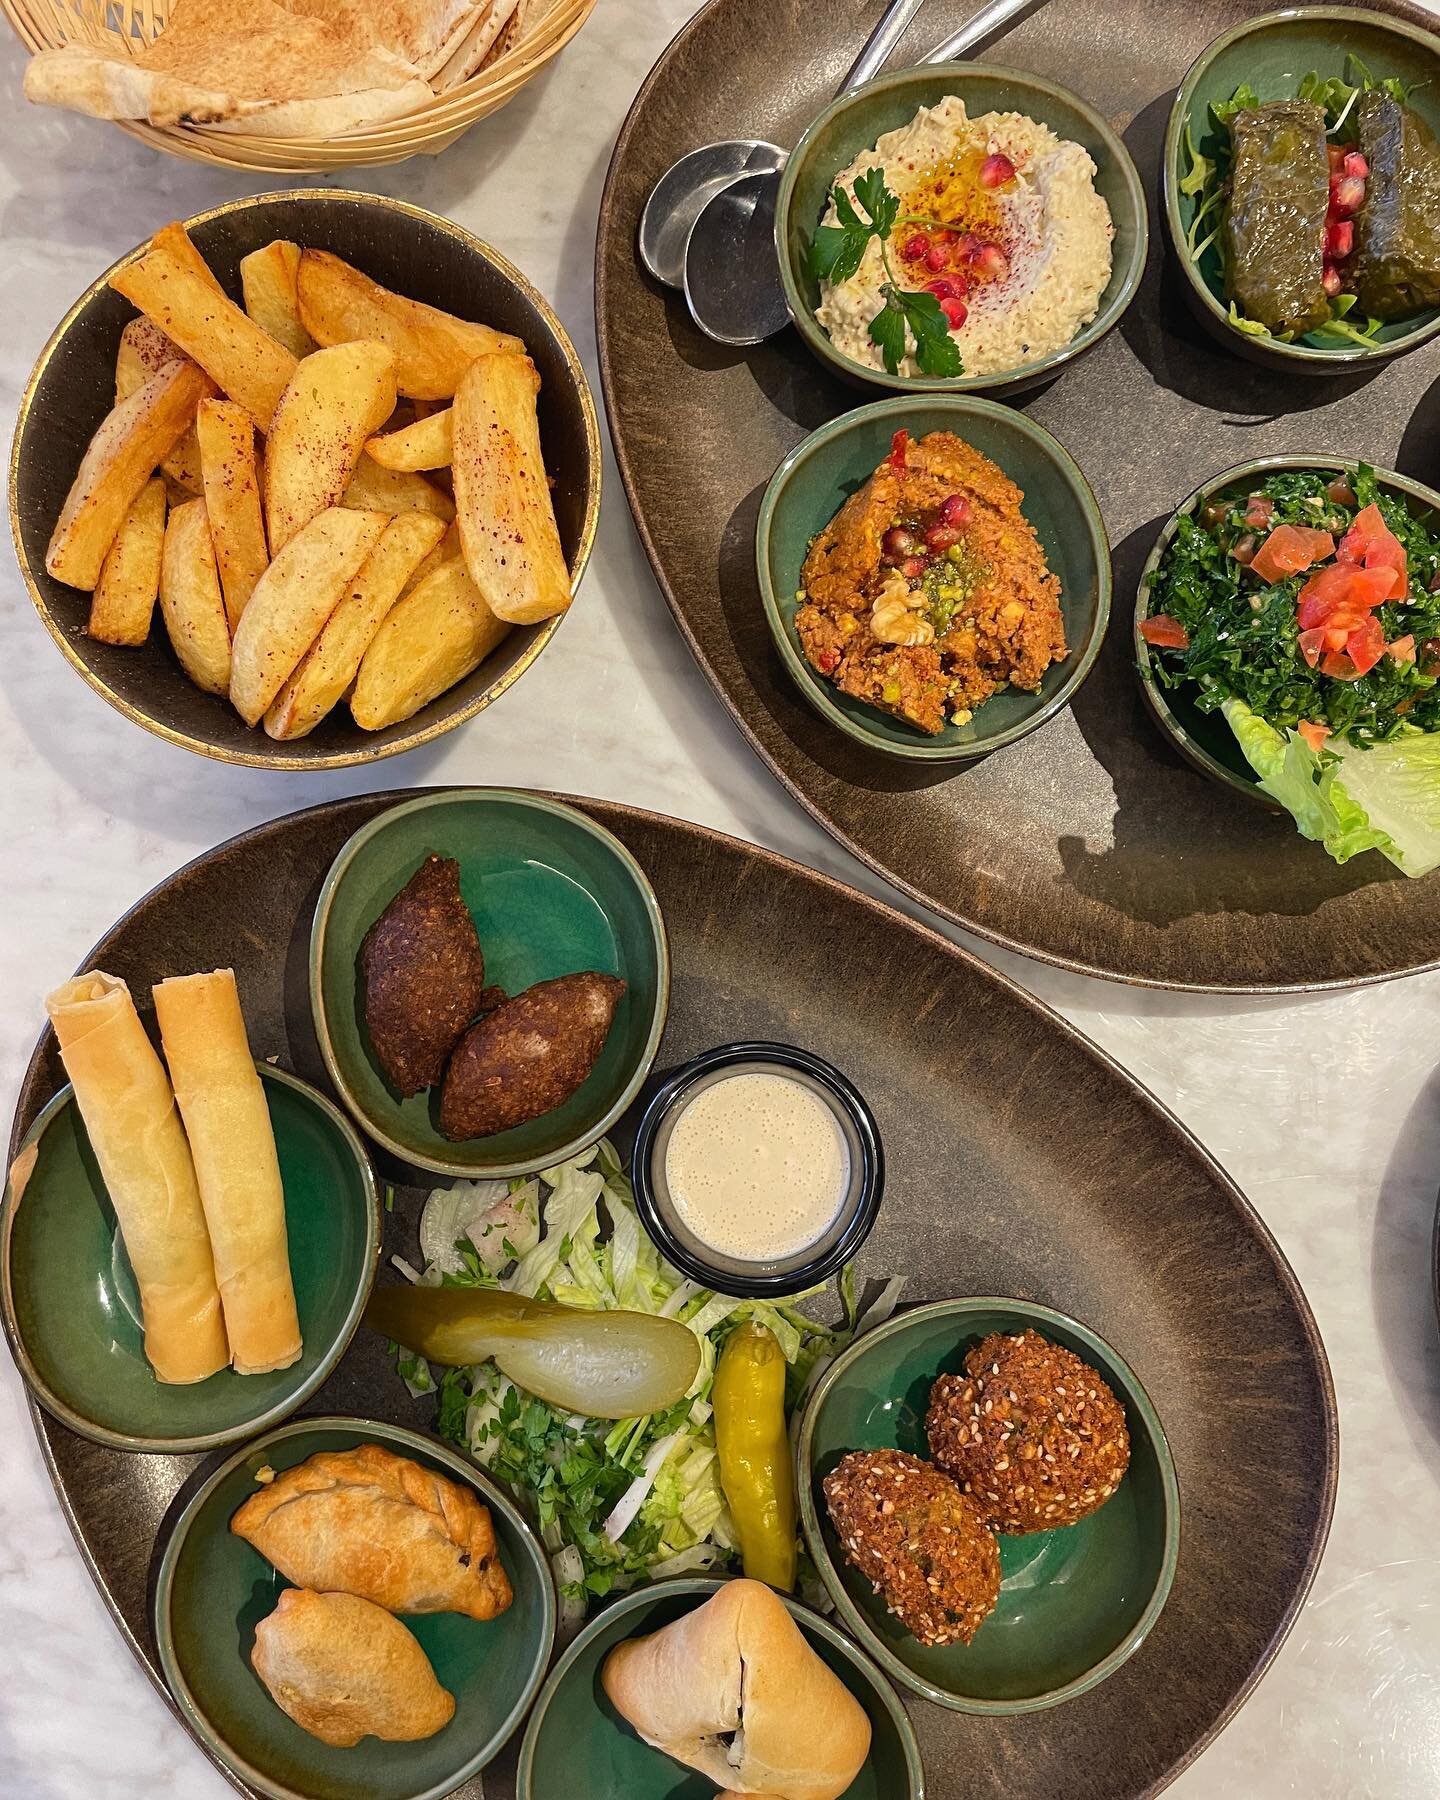 Sunday lunch on The Green, mezza style!😍✨

-

We&rsquo;ve had another busy bank holiday weekend and a big thank you to everyone who&rsquo;s visited us, we&rsquo;ll be joining you all for a day off tomorrow!🎉
.
.
.
#zeitounclaygate #lebanese #lebano